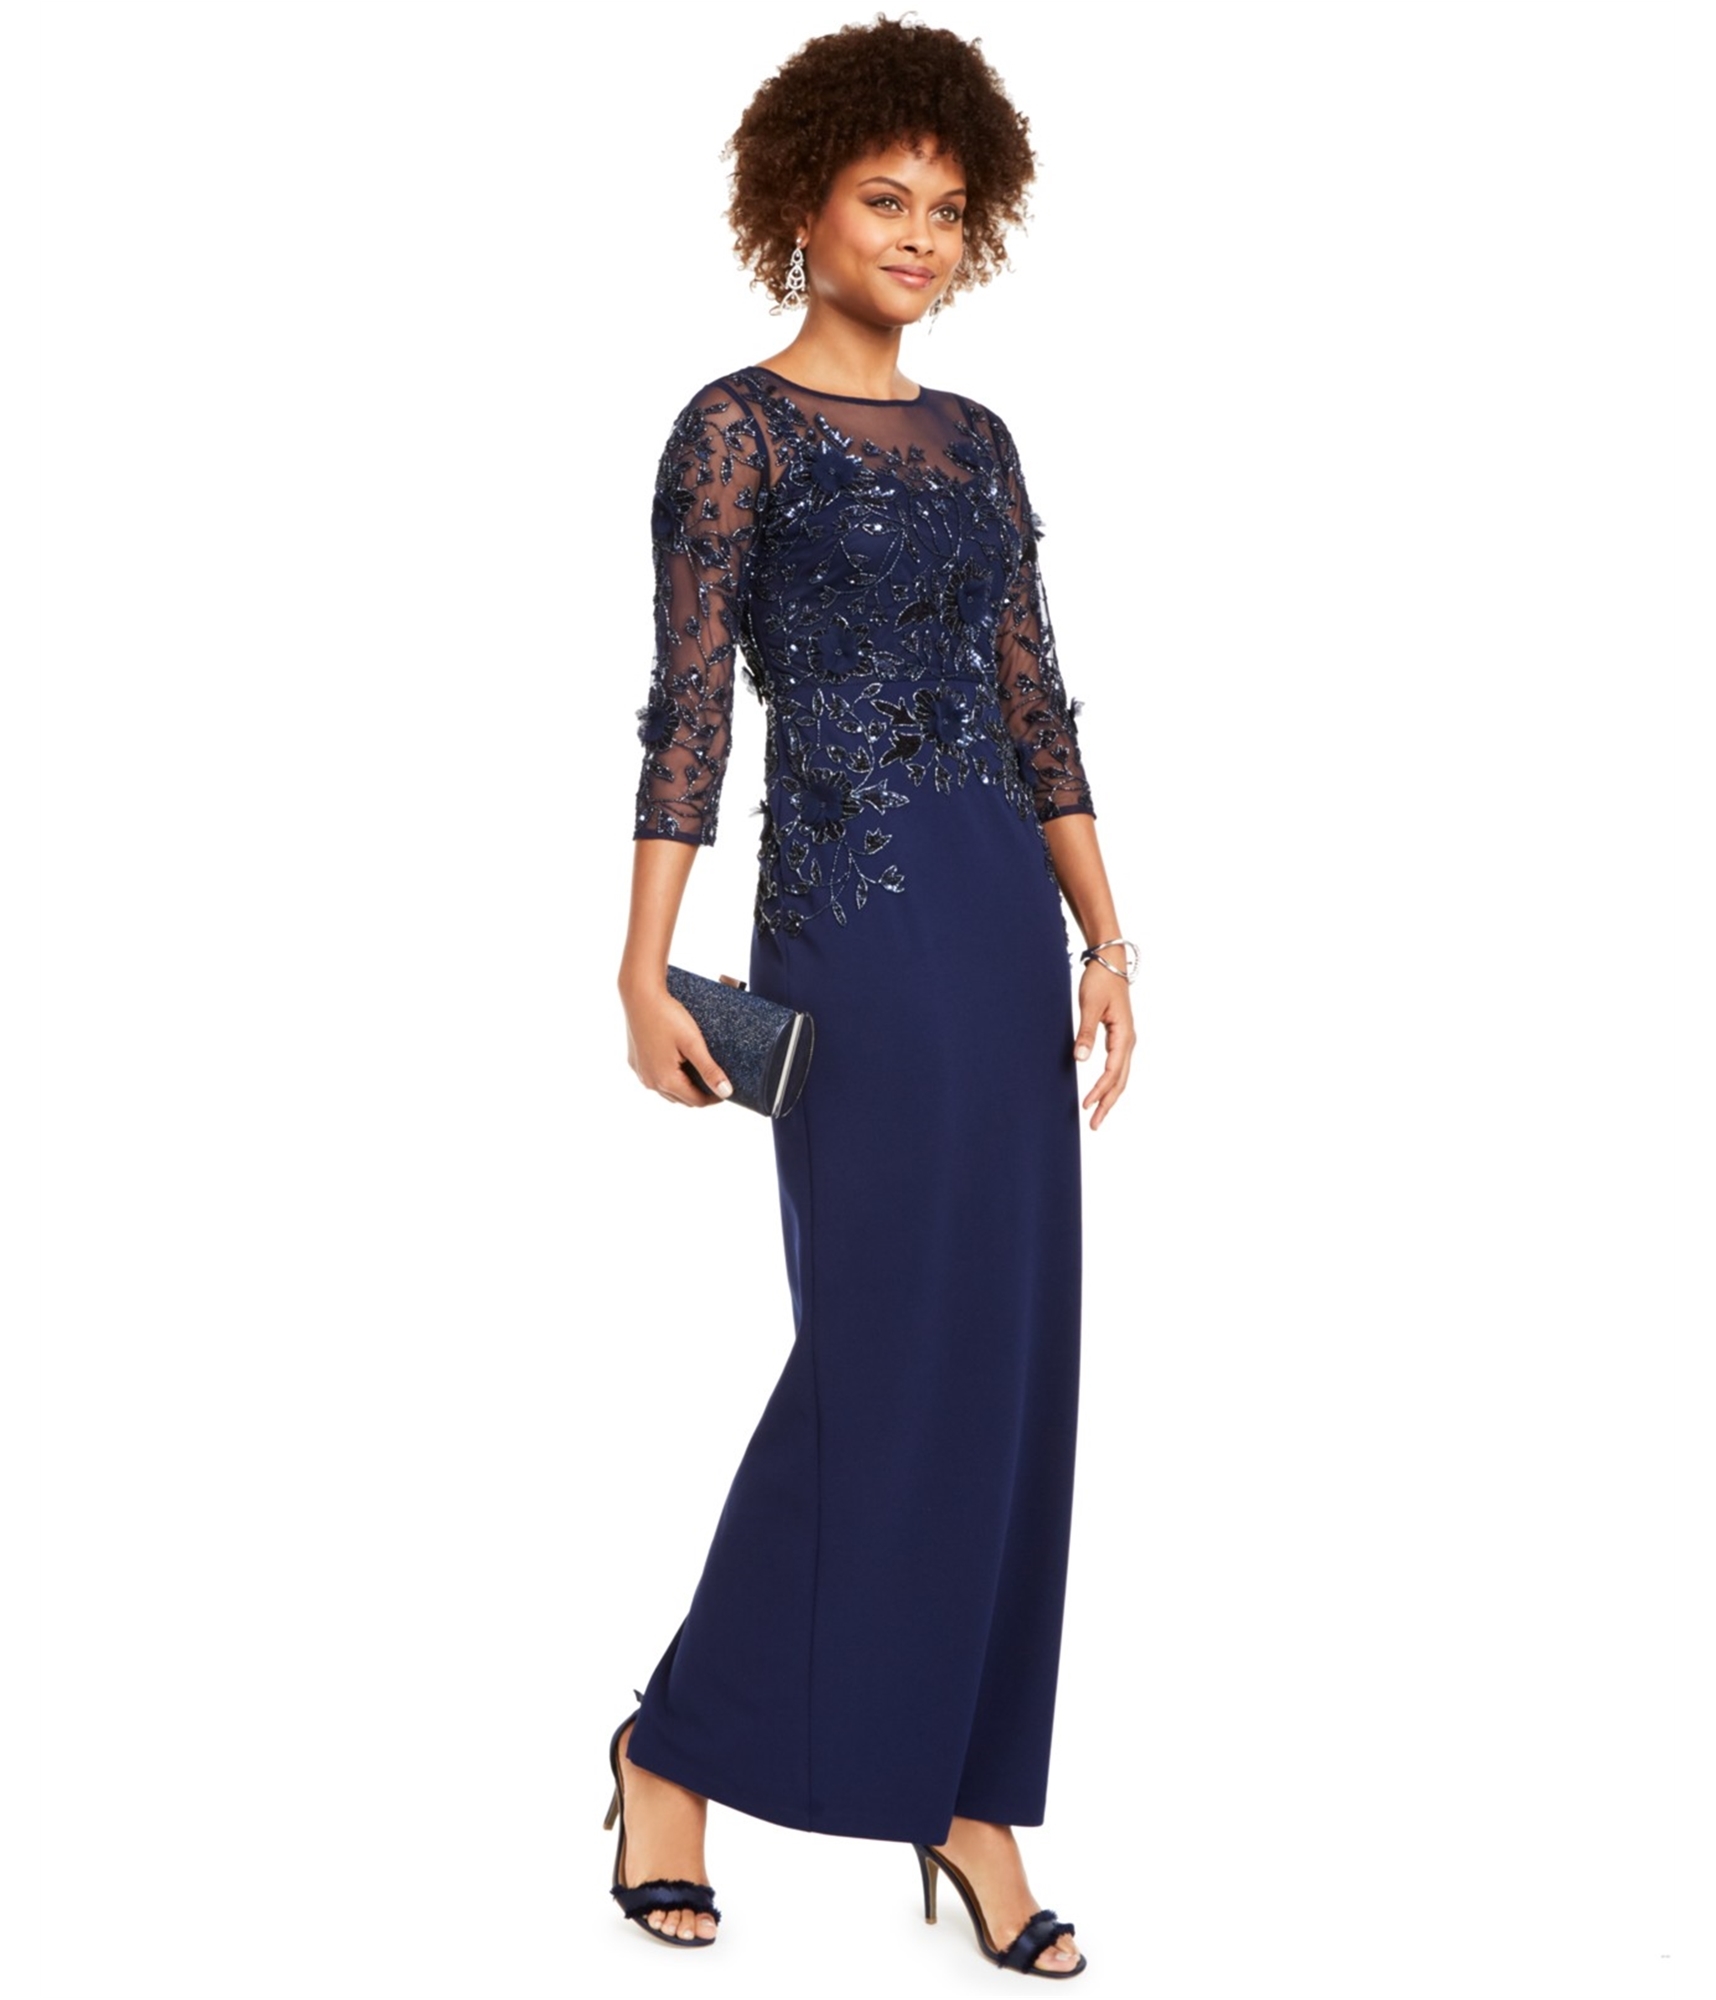 Intacto simpático a lo largo Buy a Womens Adrianna Papell Sequined Illusion-Yoke Column Gown Dress  Online | TagsWeekly.com